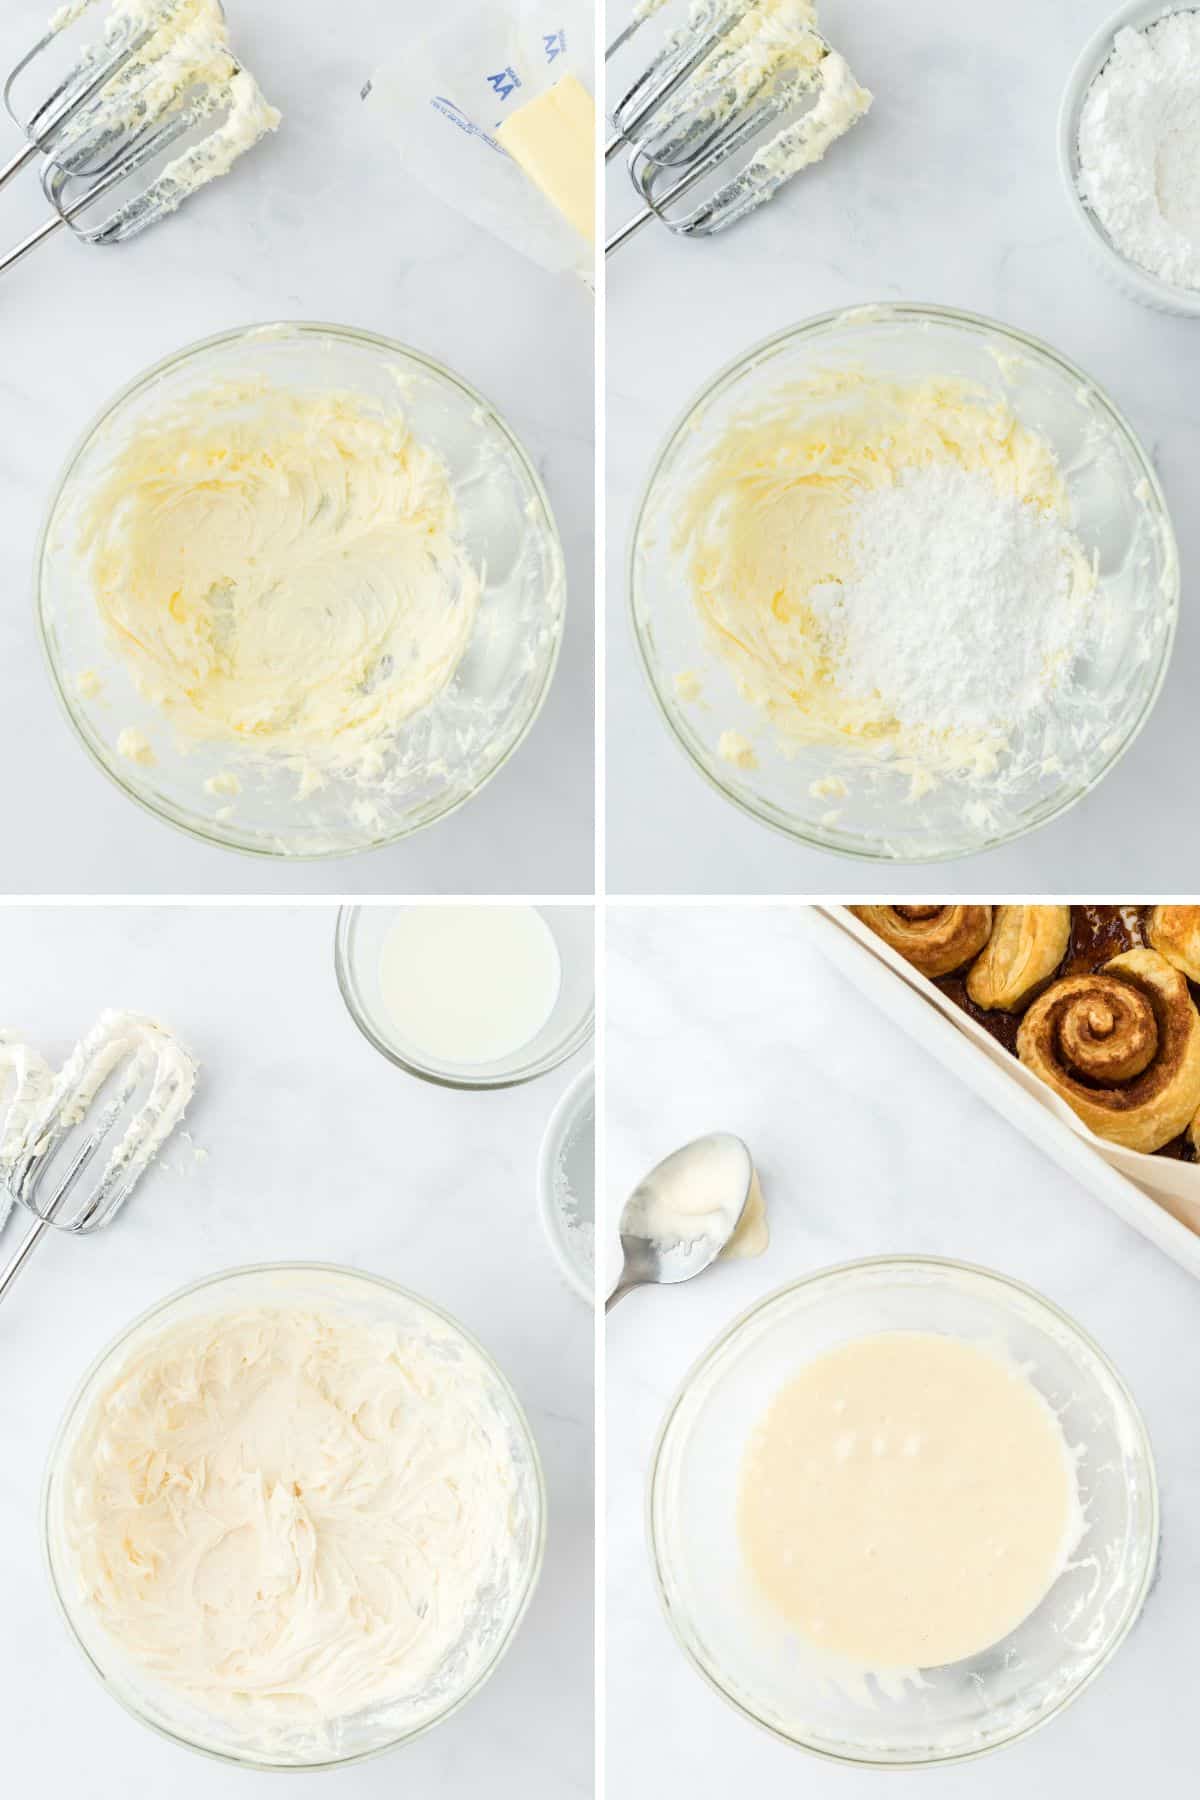 A collage showing the steps for mixing up the cinnamon roll icing.